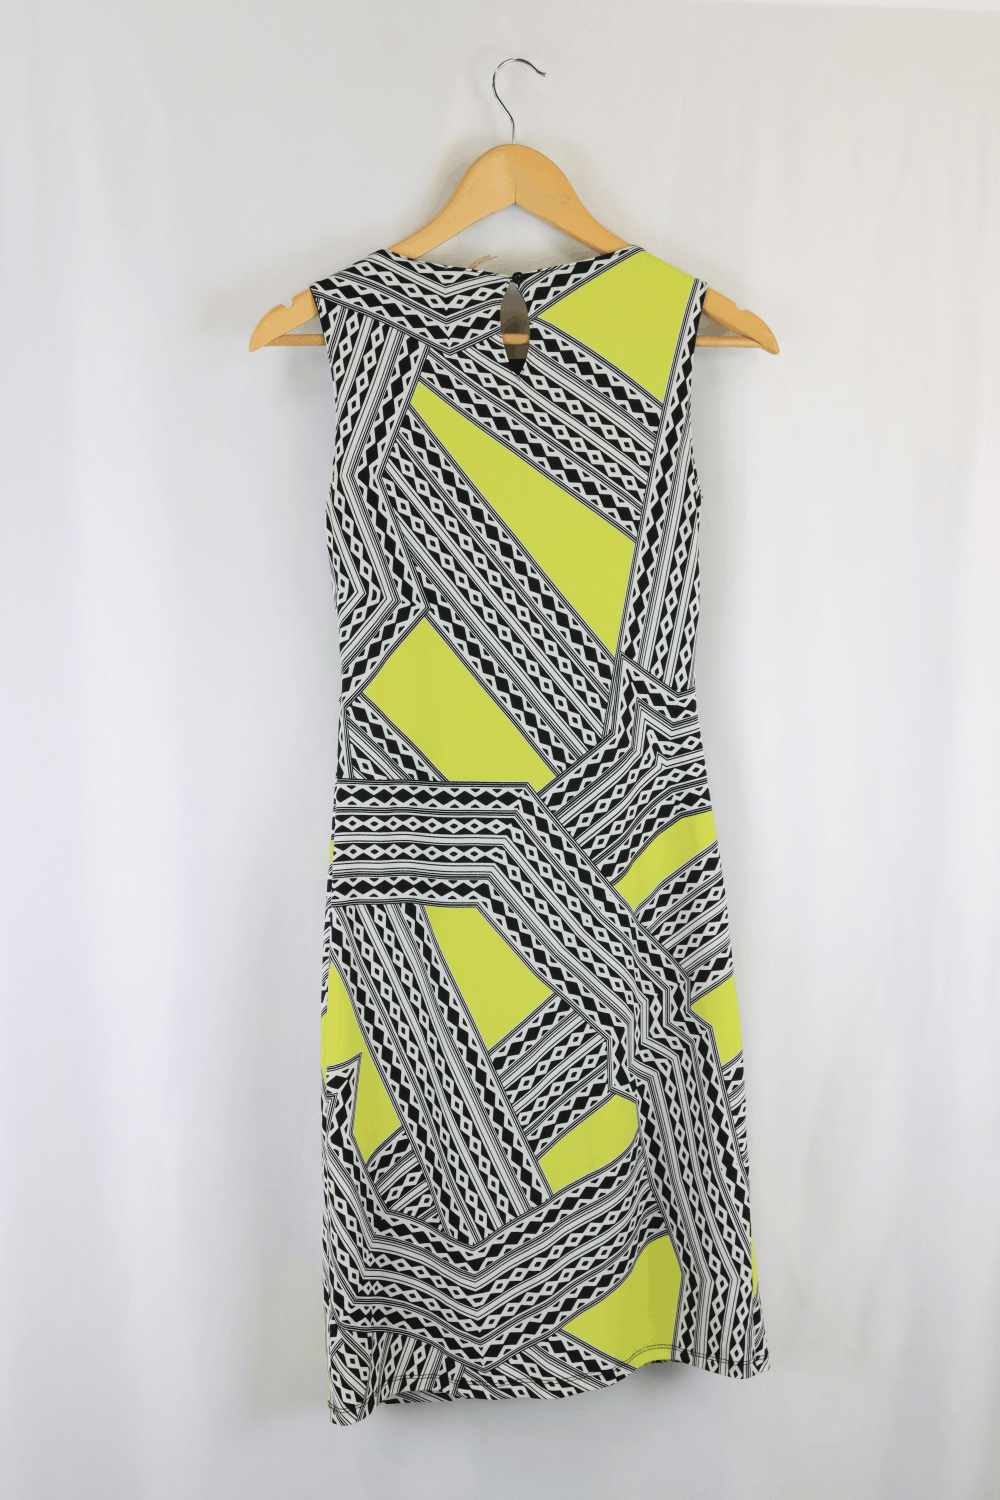 Principles By Bendelisi Petite Black and White and YELLOW Dress 8